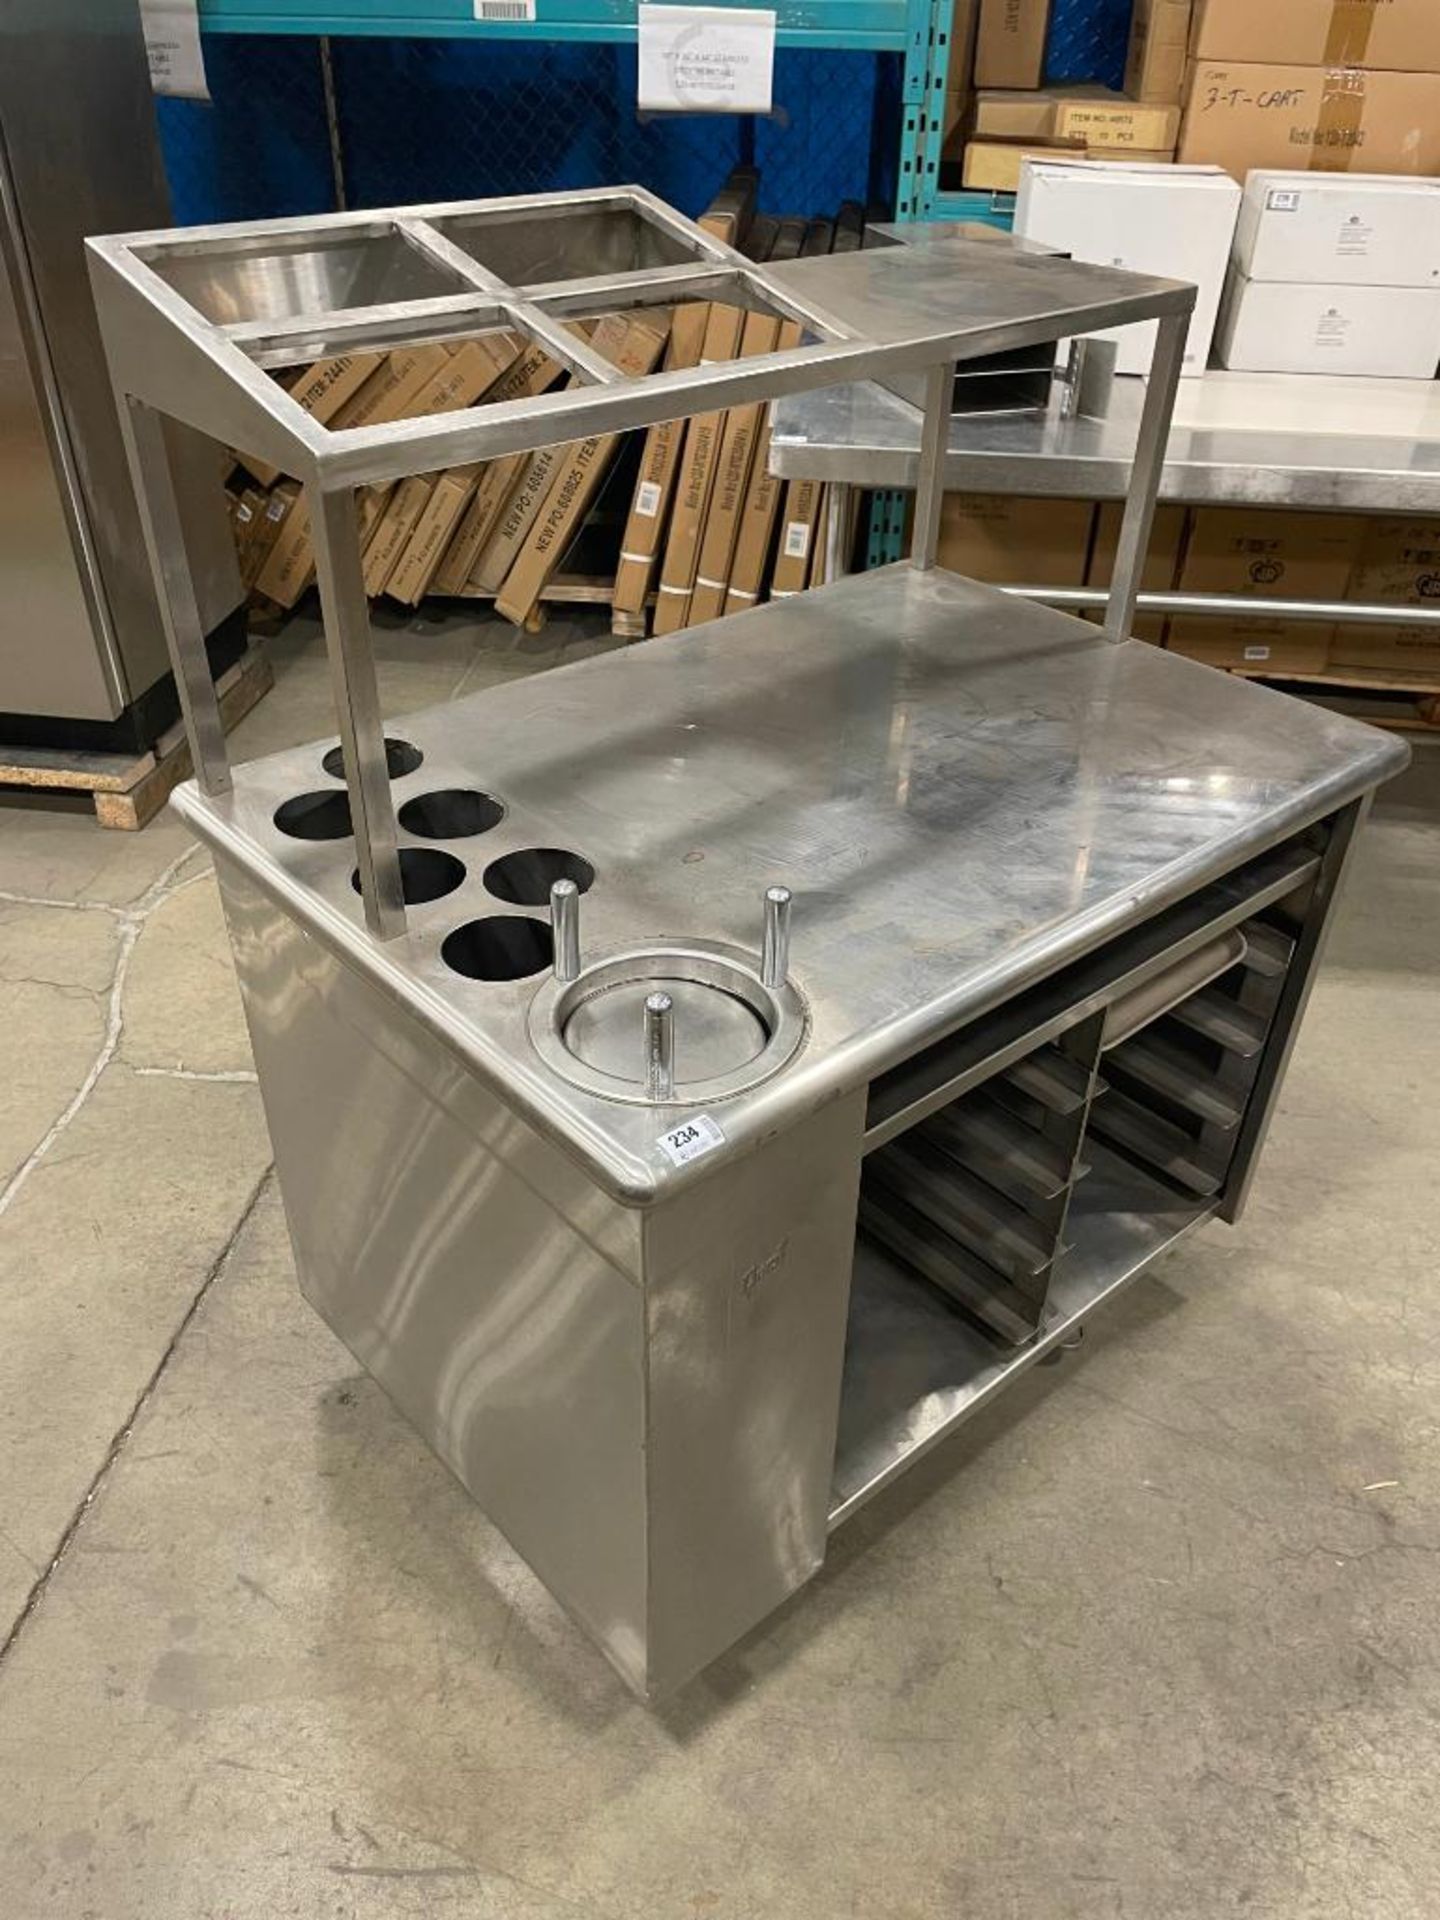 QUEST CUSTOM STAINLESS STEEL MOBILE CART WITH PLATE LOWERATOR - Image 2 of 12